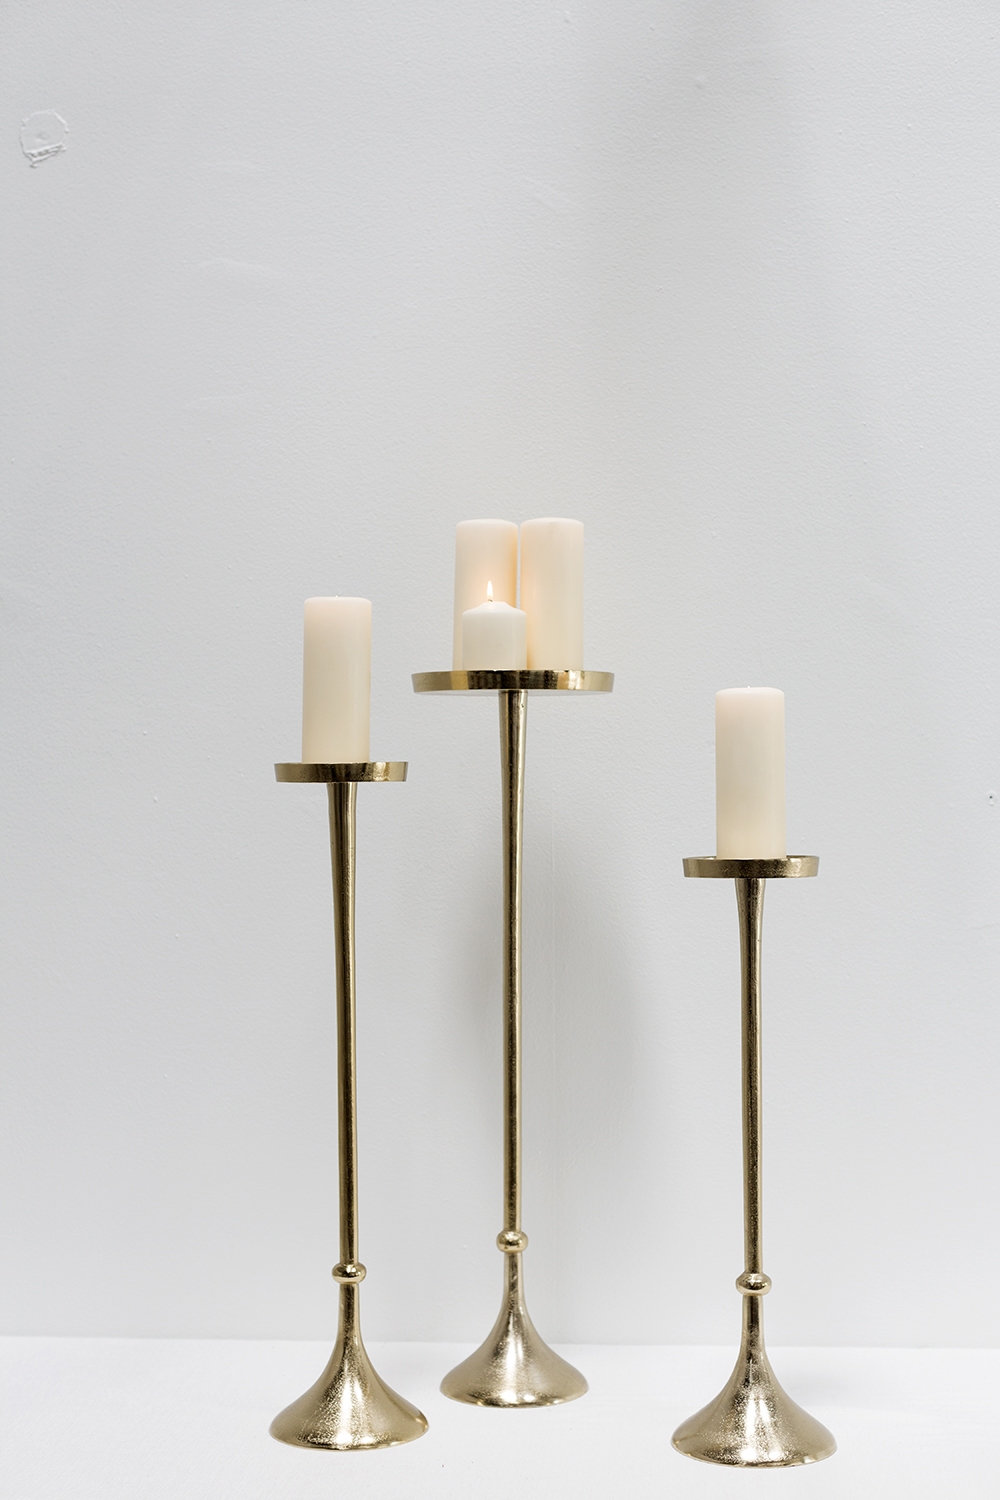 Divine Lifestyle Candle Holders Set Three Ultra Tall Slim Gold Aluminum Simple Moss Manor AD72781 00 2  